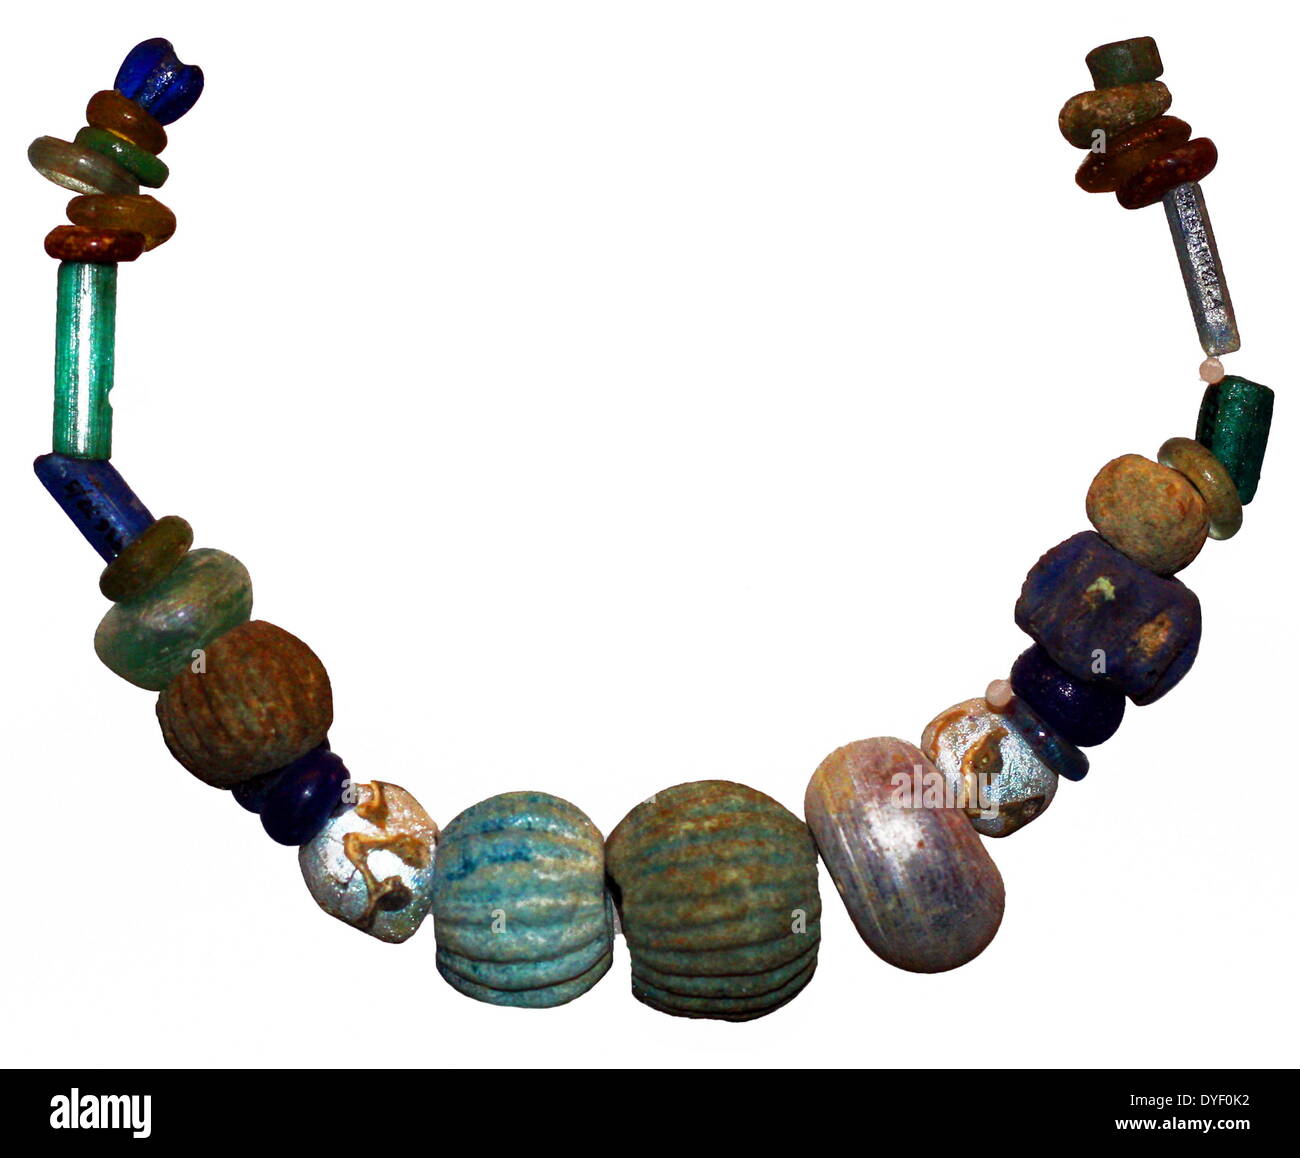 Roman bead necklace. 1st-3rd century AD. Found in the Roman Baths, England. Shows multiple types of decorative handmade beads. Stock Photo